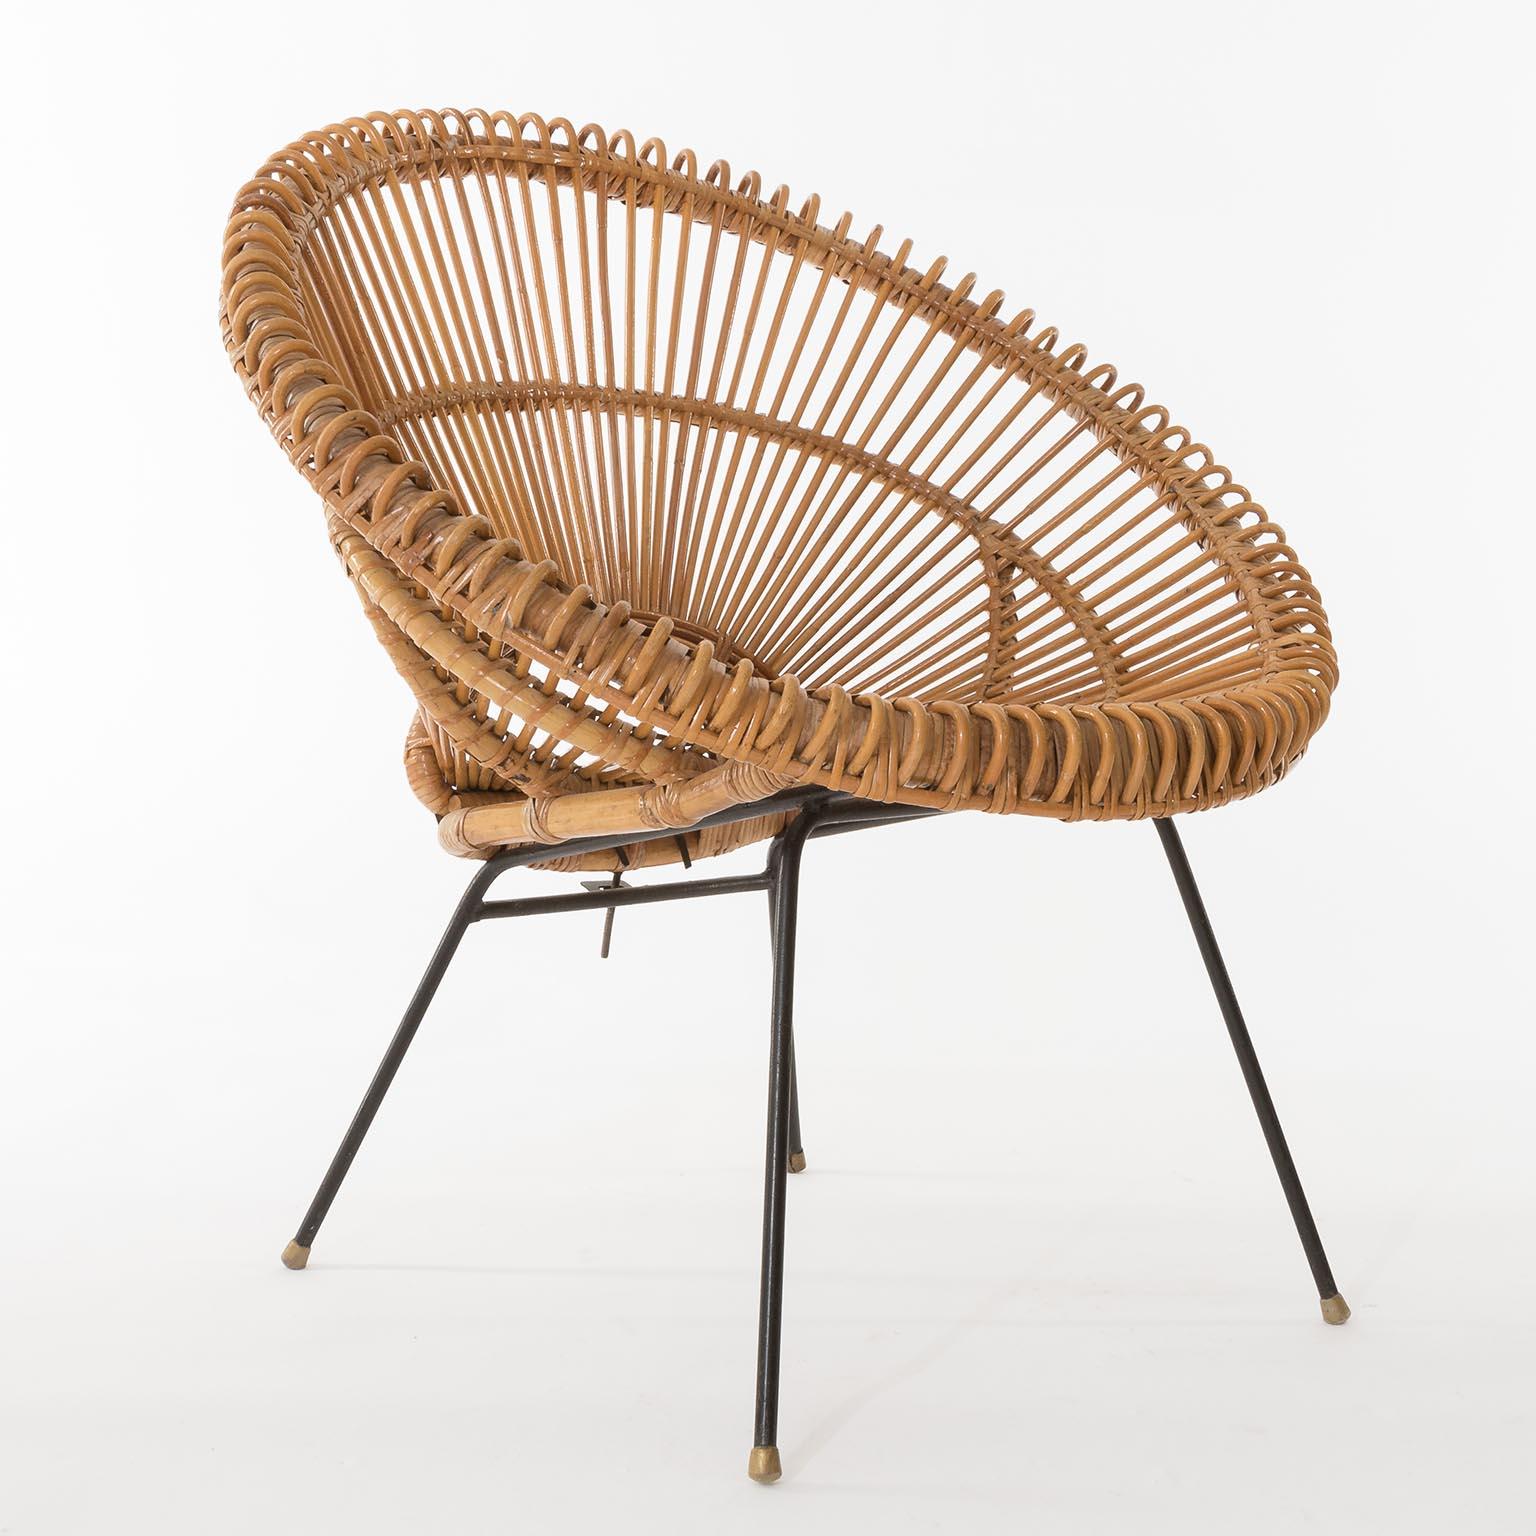 Pair of Mid-Century Modern Rattan Bamboo Chairs, Janine Abraham, Dirk Rol, 1960s For Sale 2